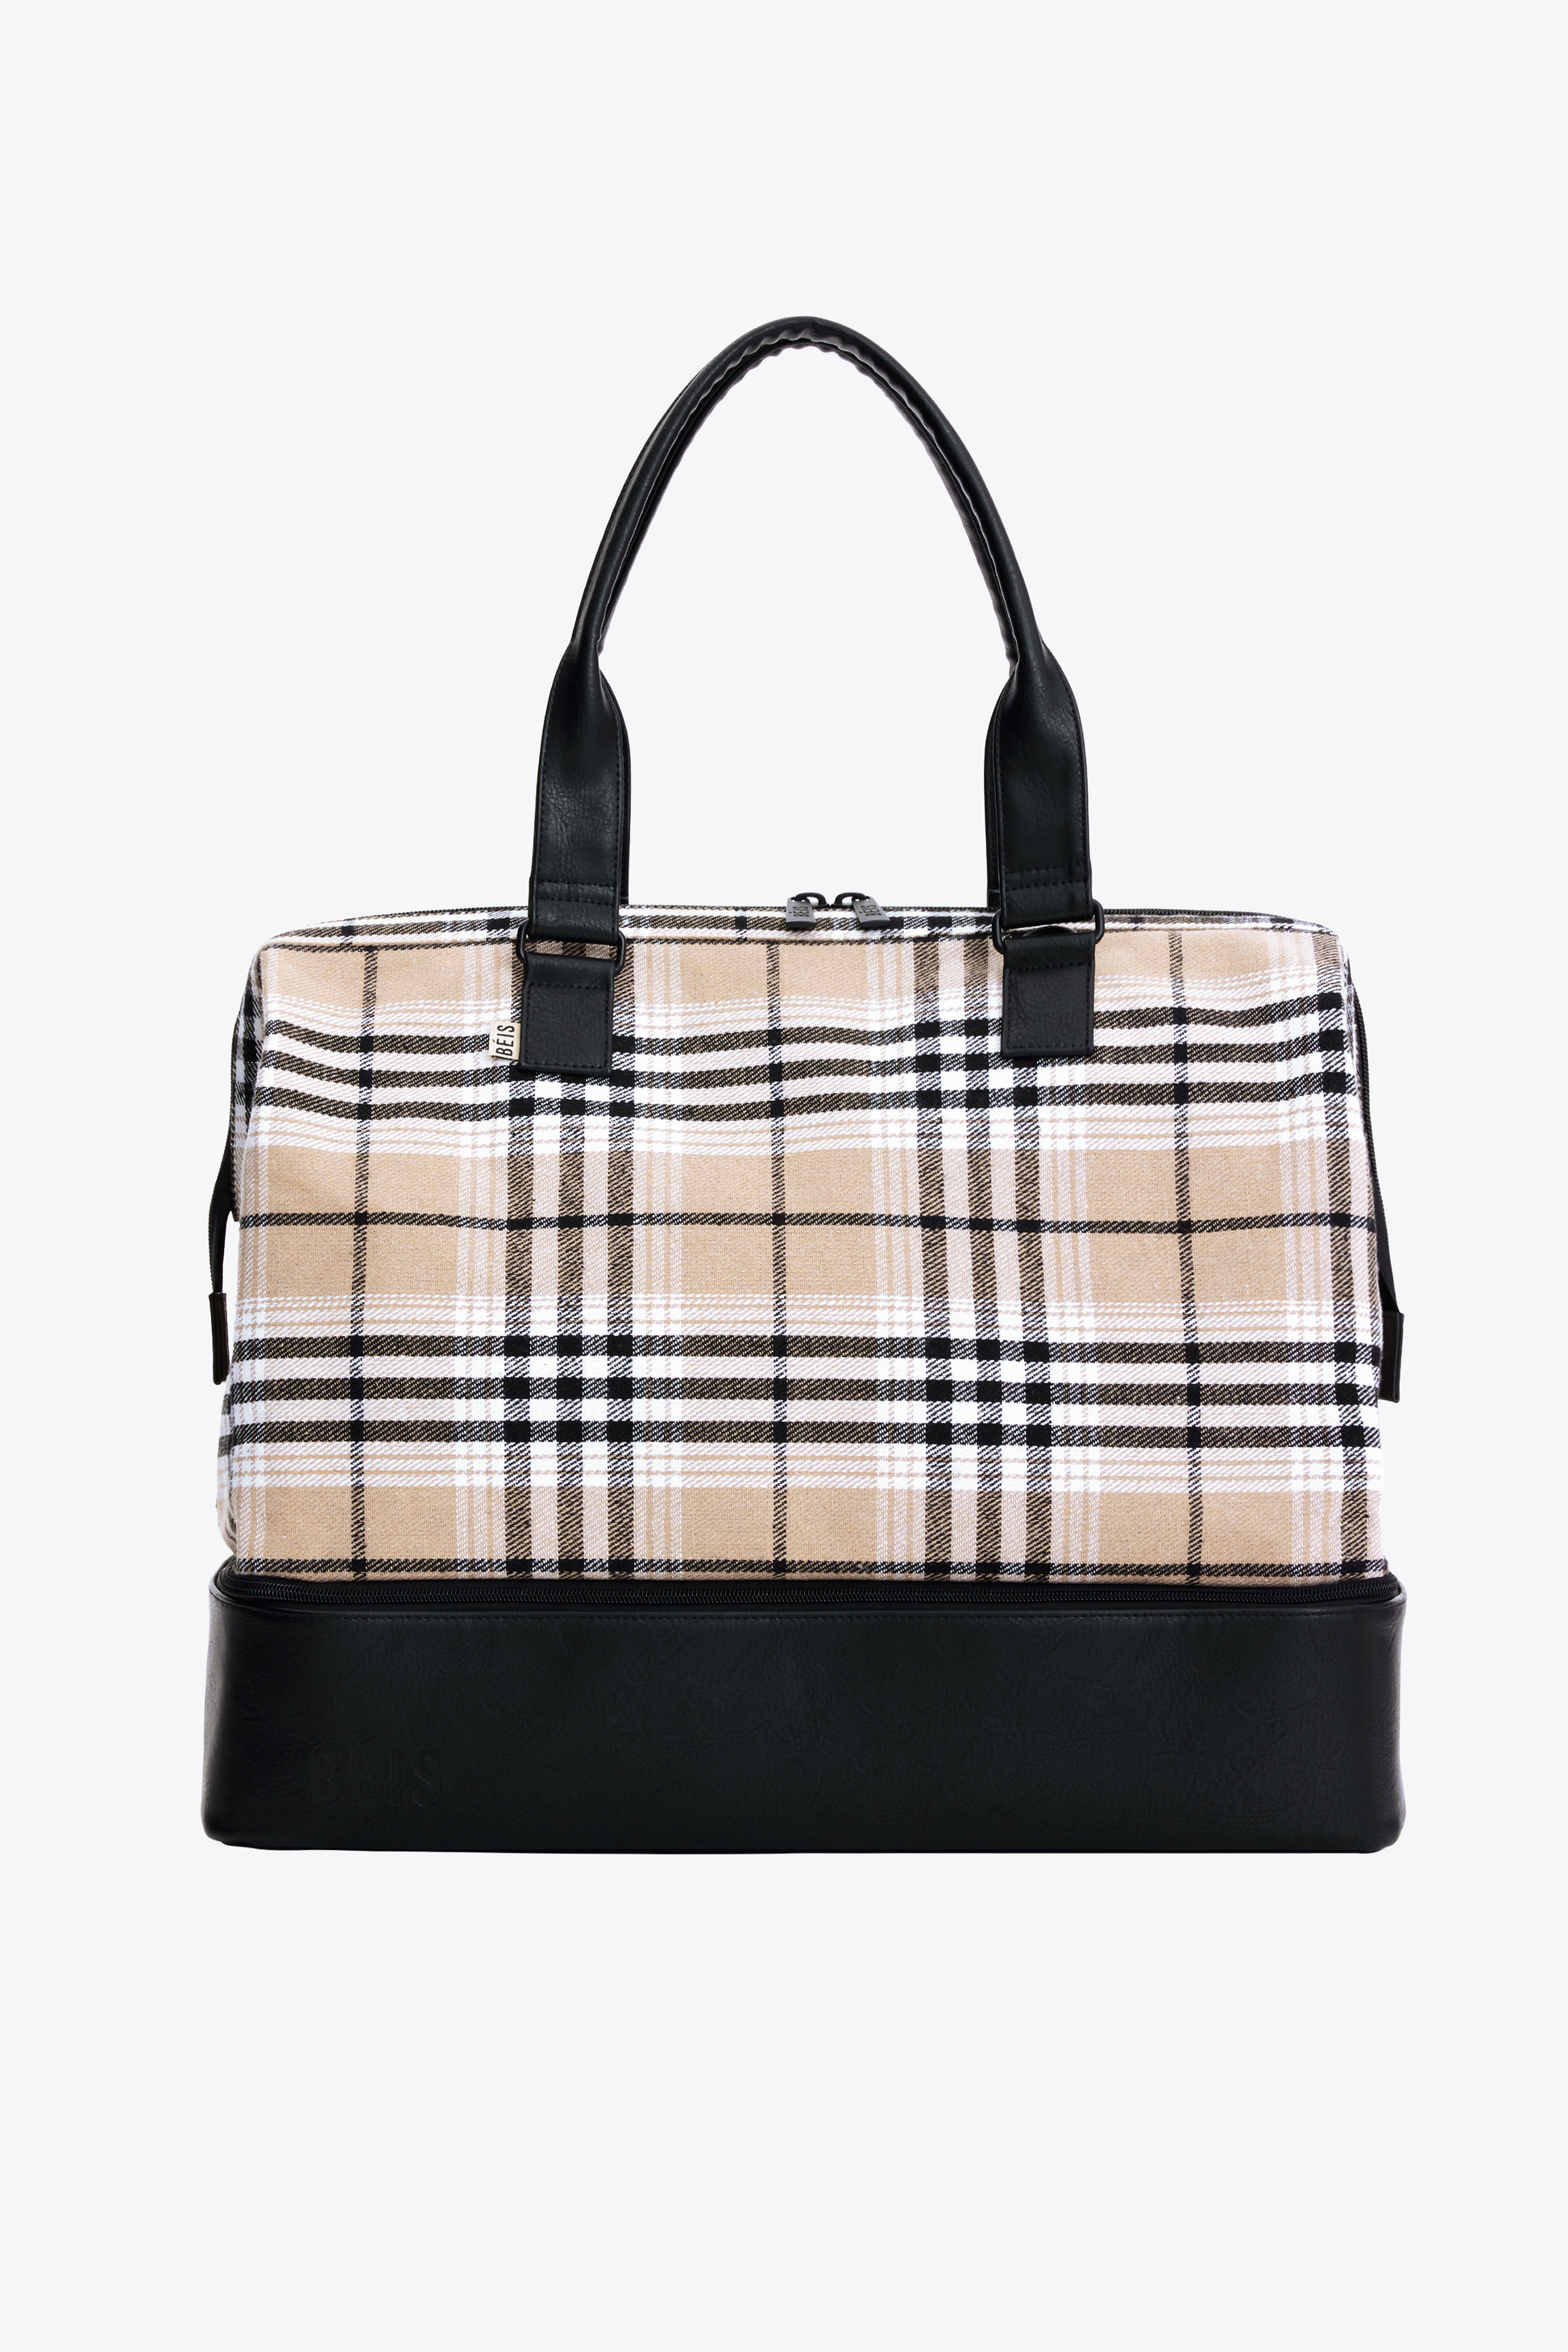 BURBERRY Leather Check Tote in Olive - More Than You Can Imagine